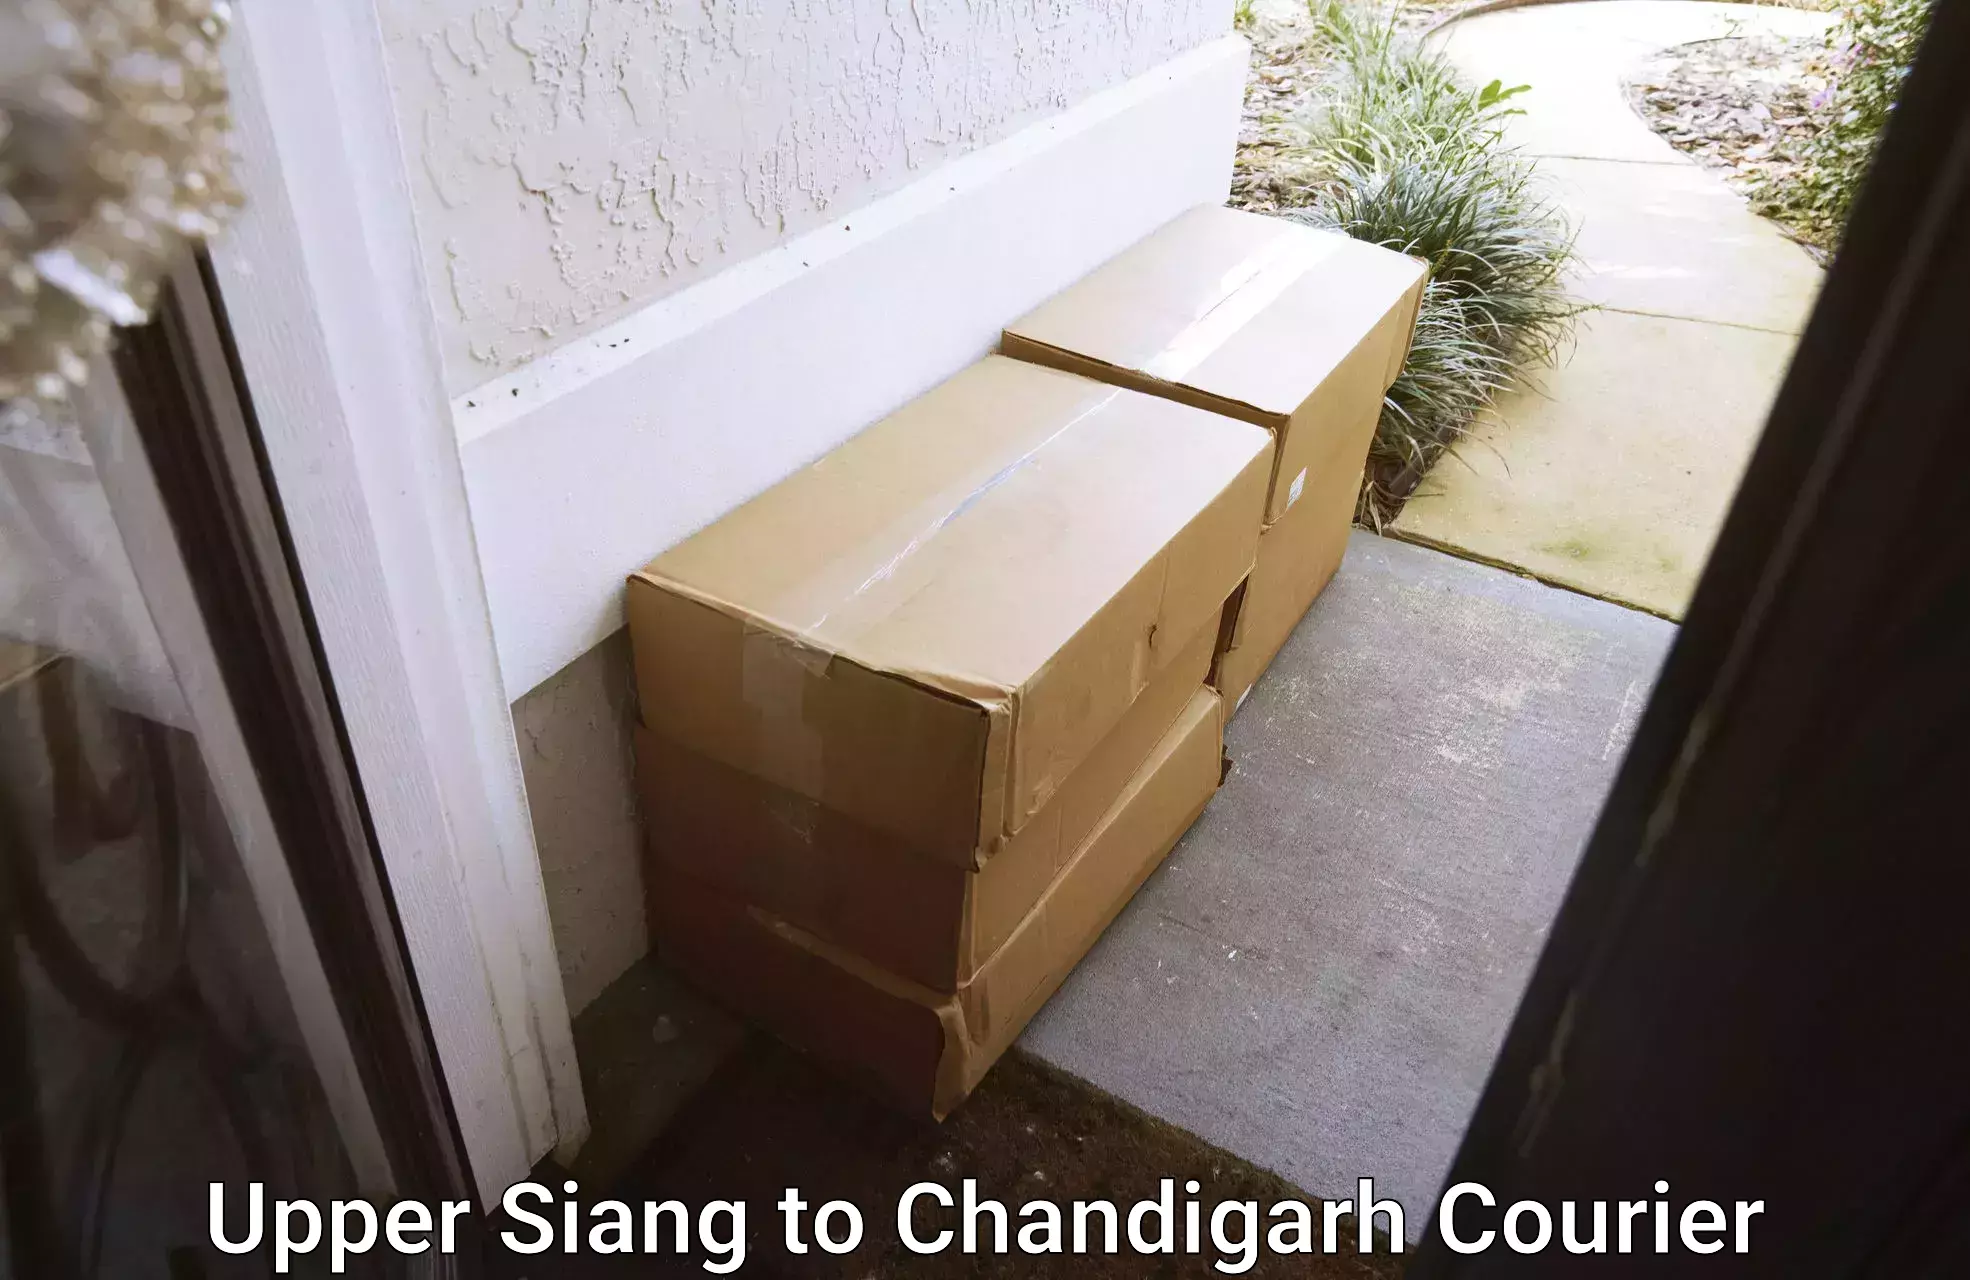 Pharmaceutical courier Upper Siang to Chandigarh